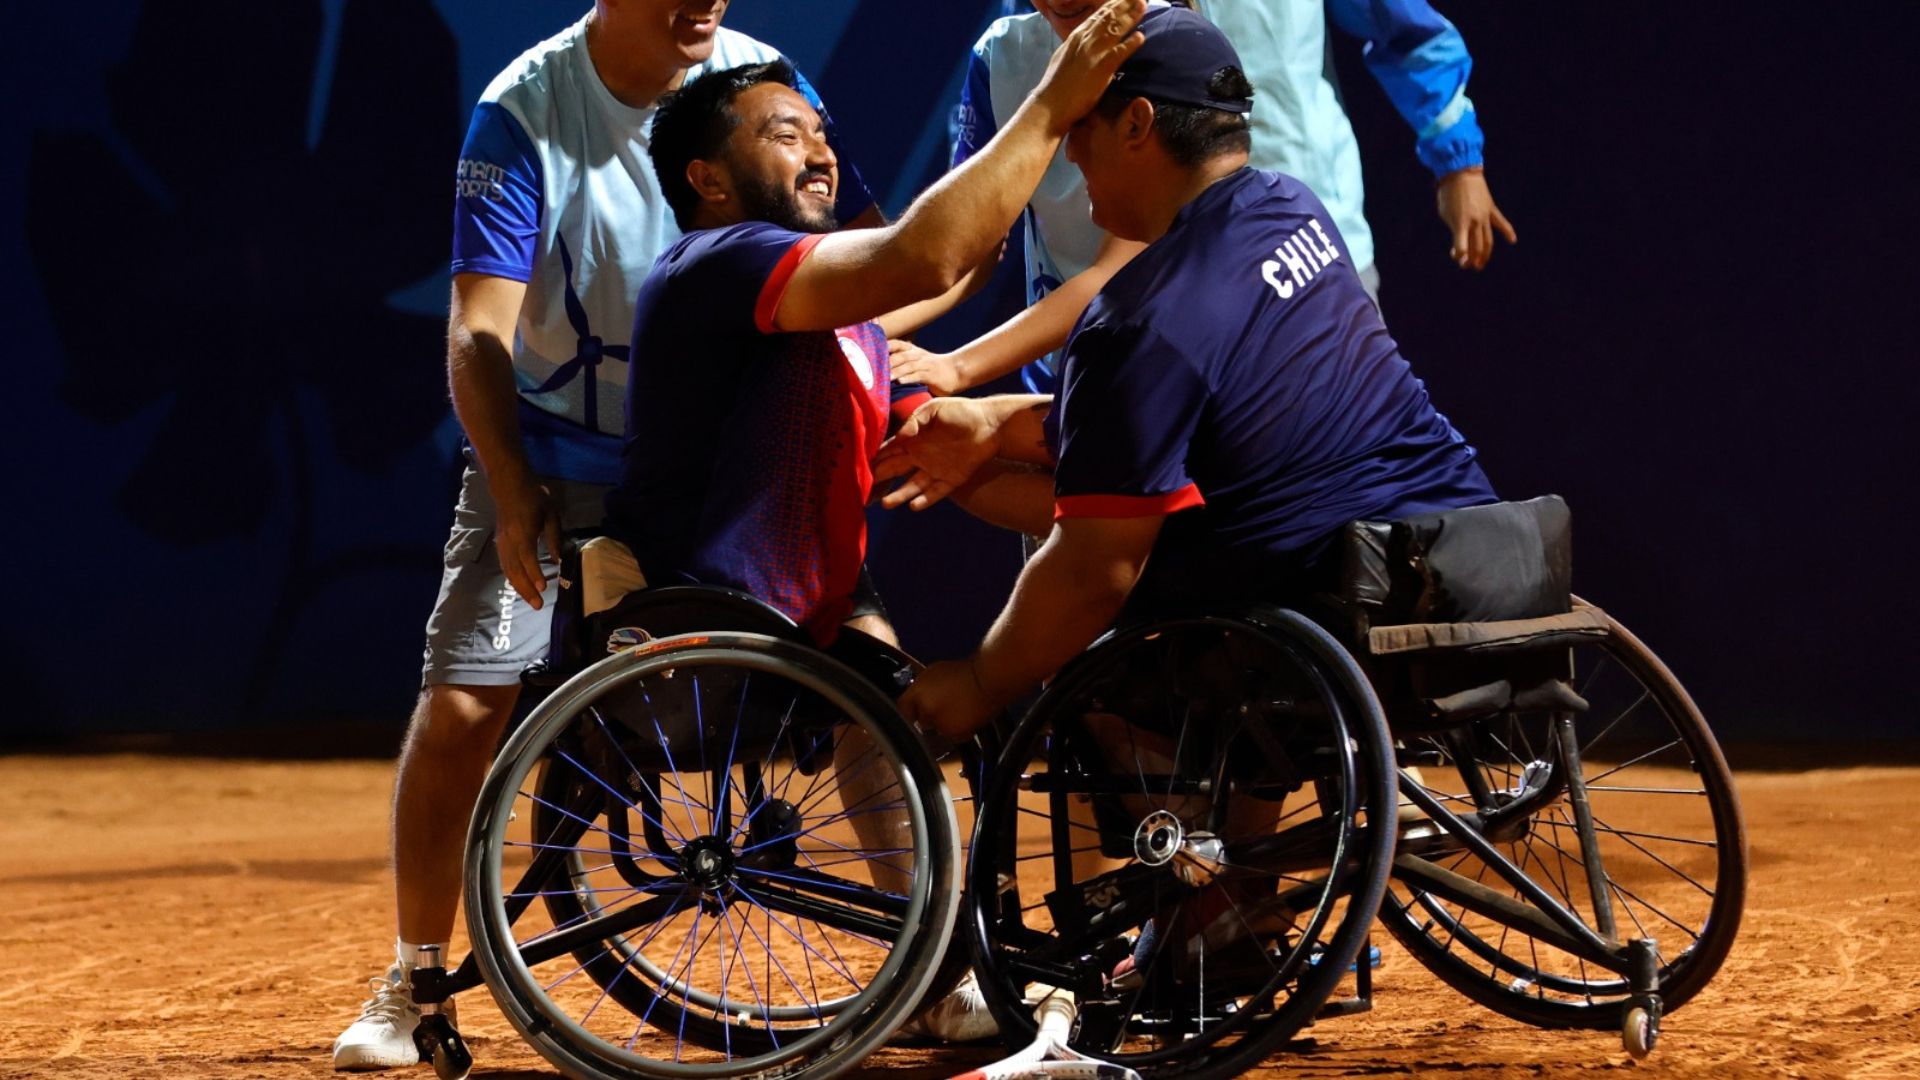 Chile Prevails Over Brazil in Final Match of Tennis